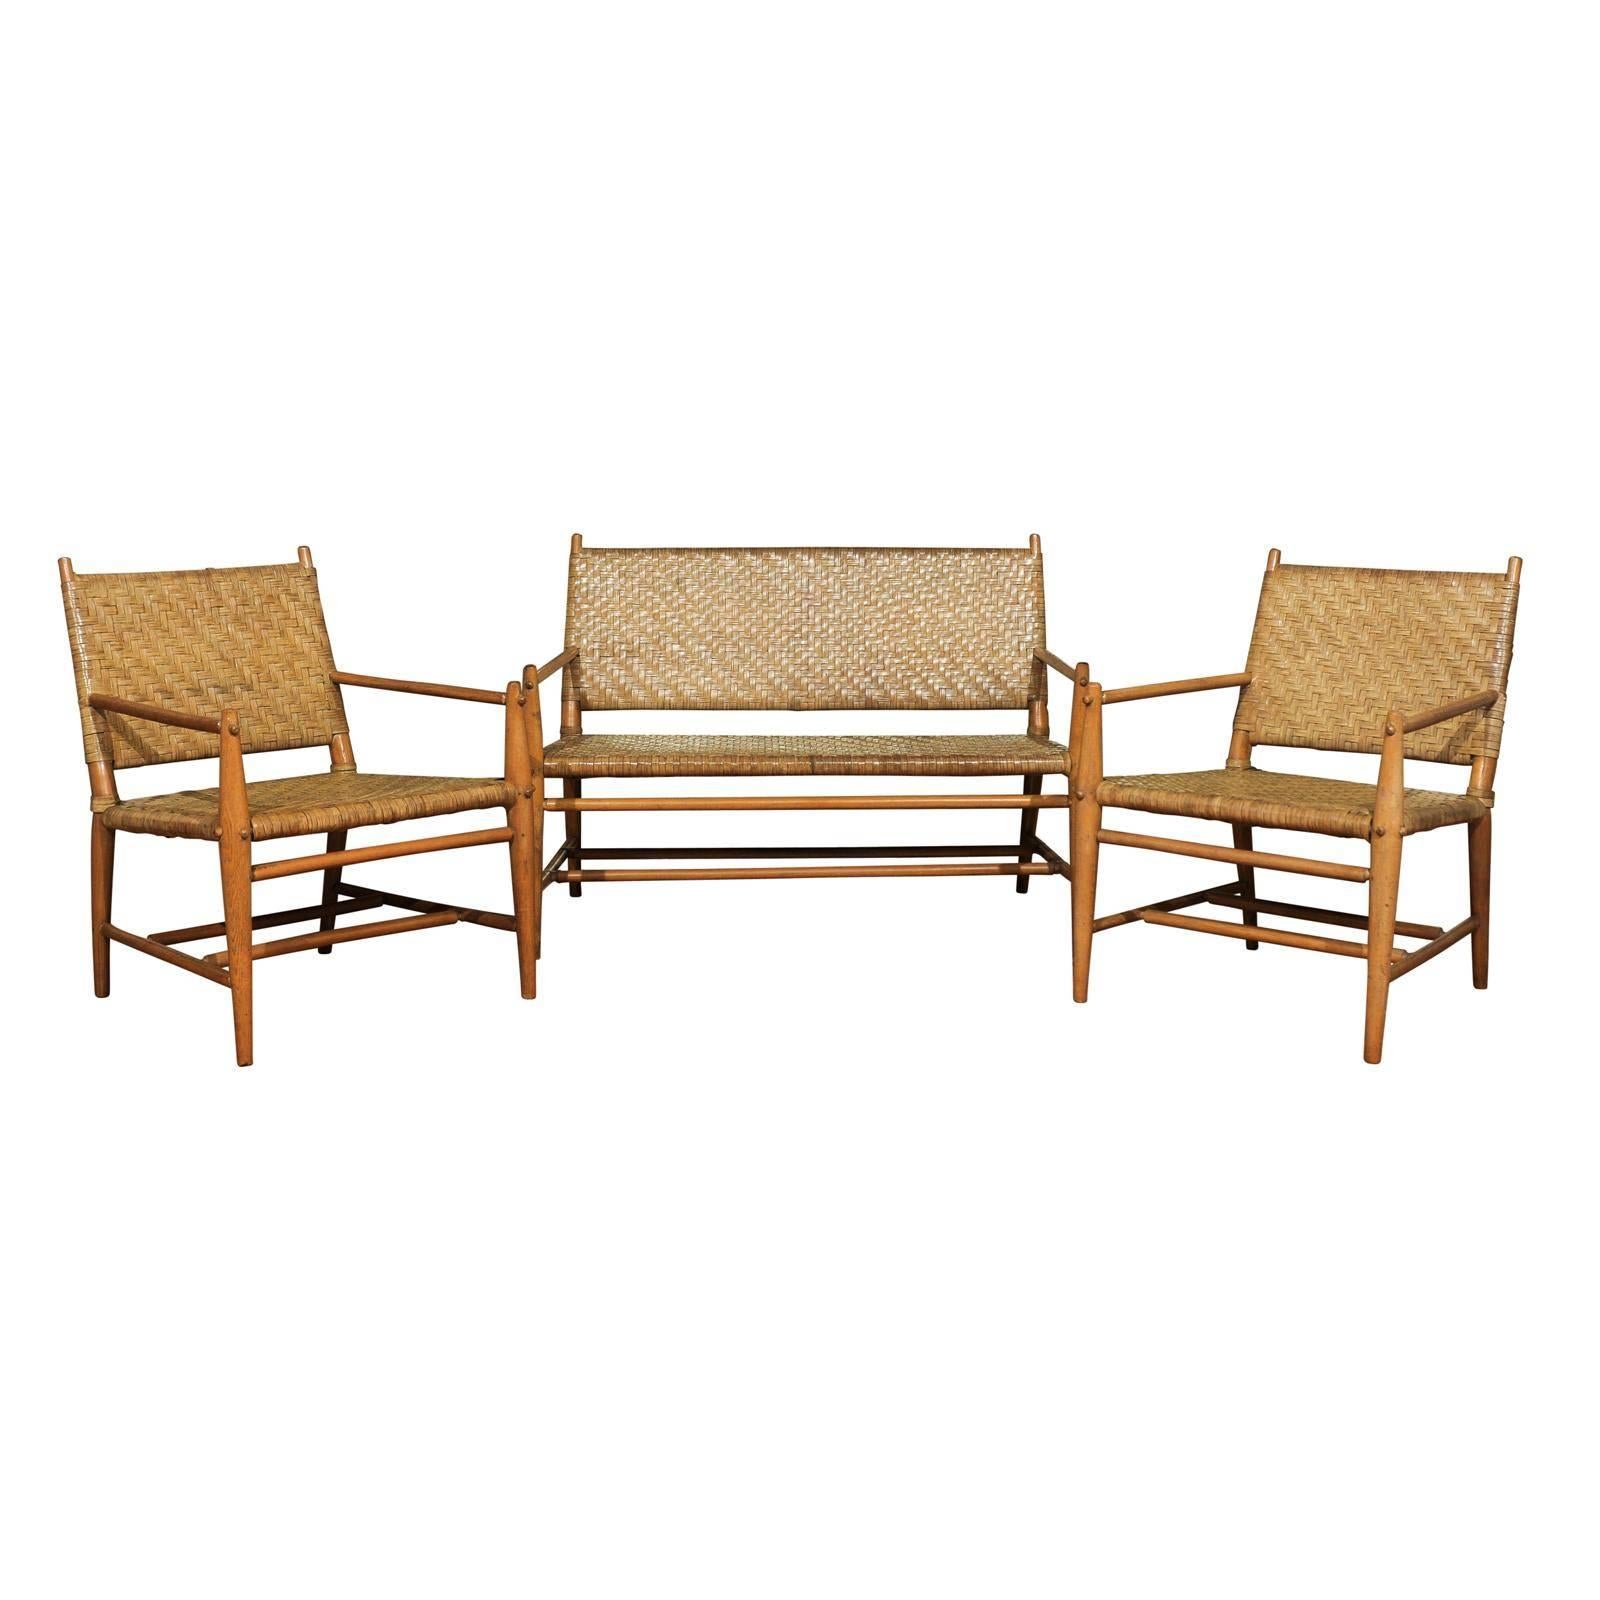 Exceptional Modern Seating Set by Russel Wright for Old Hickory, circa 1940